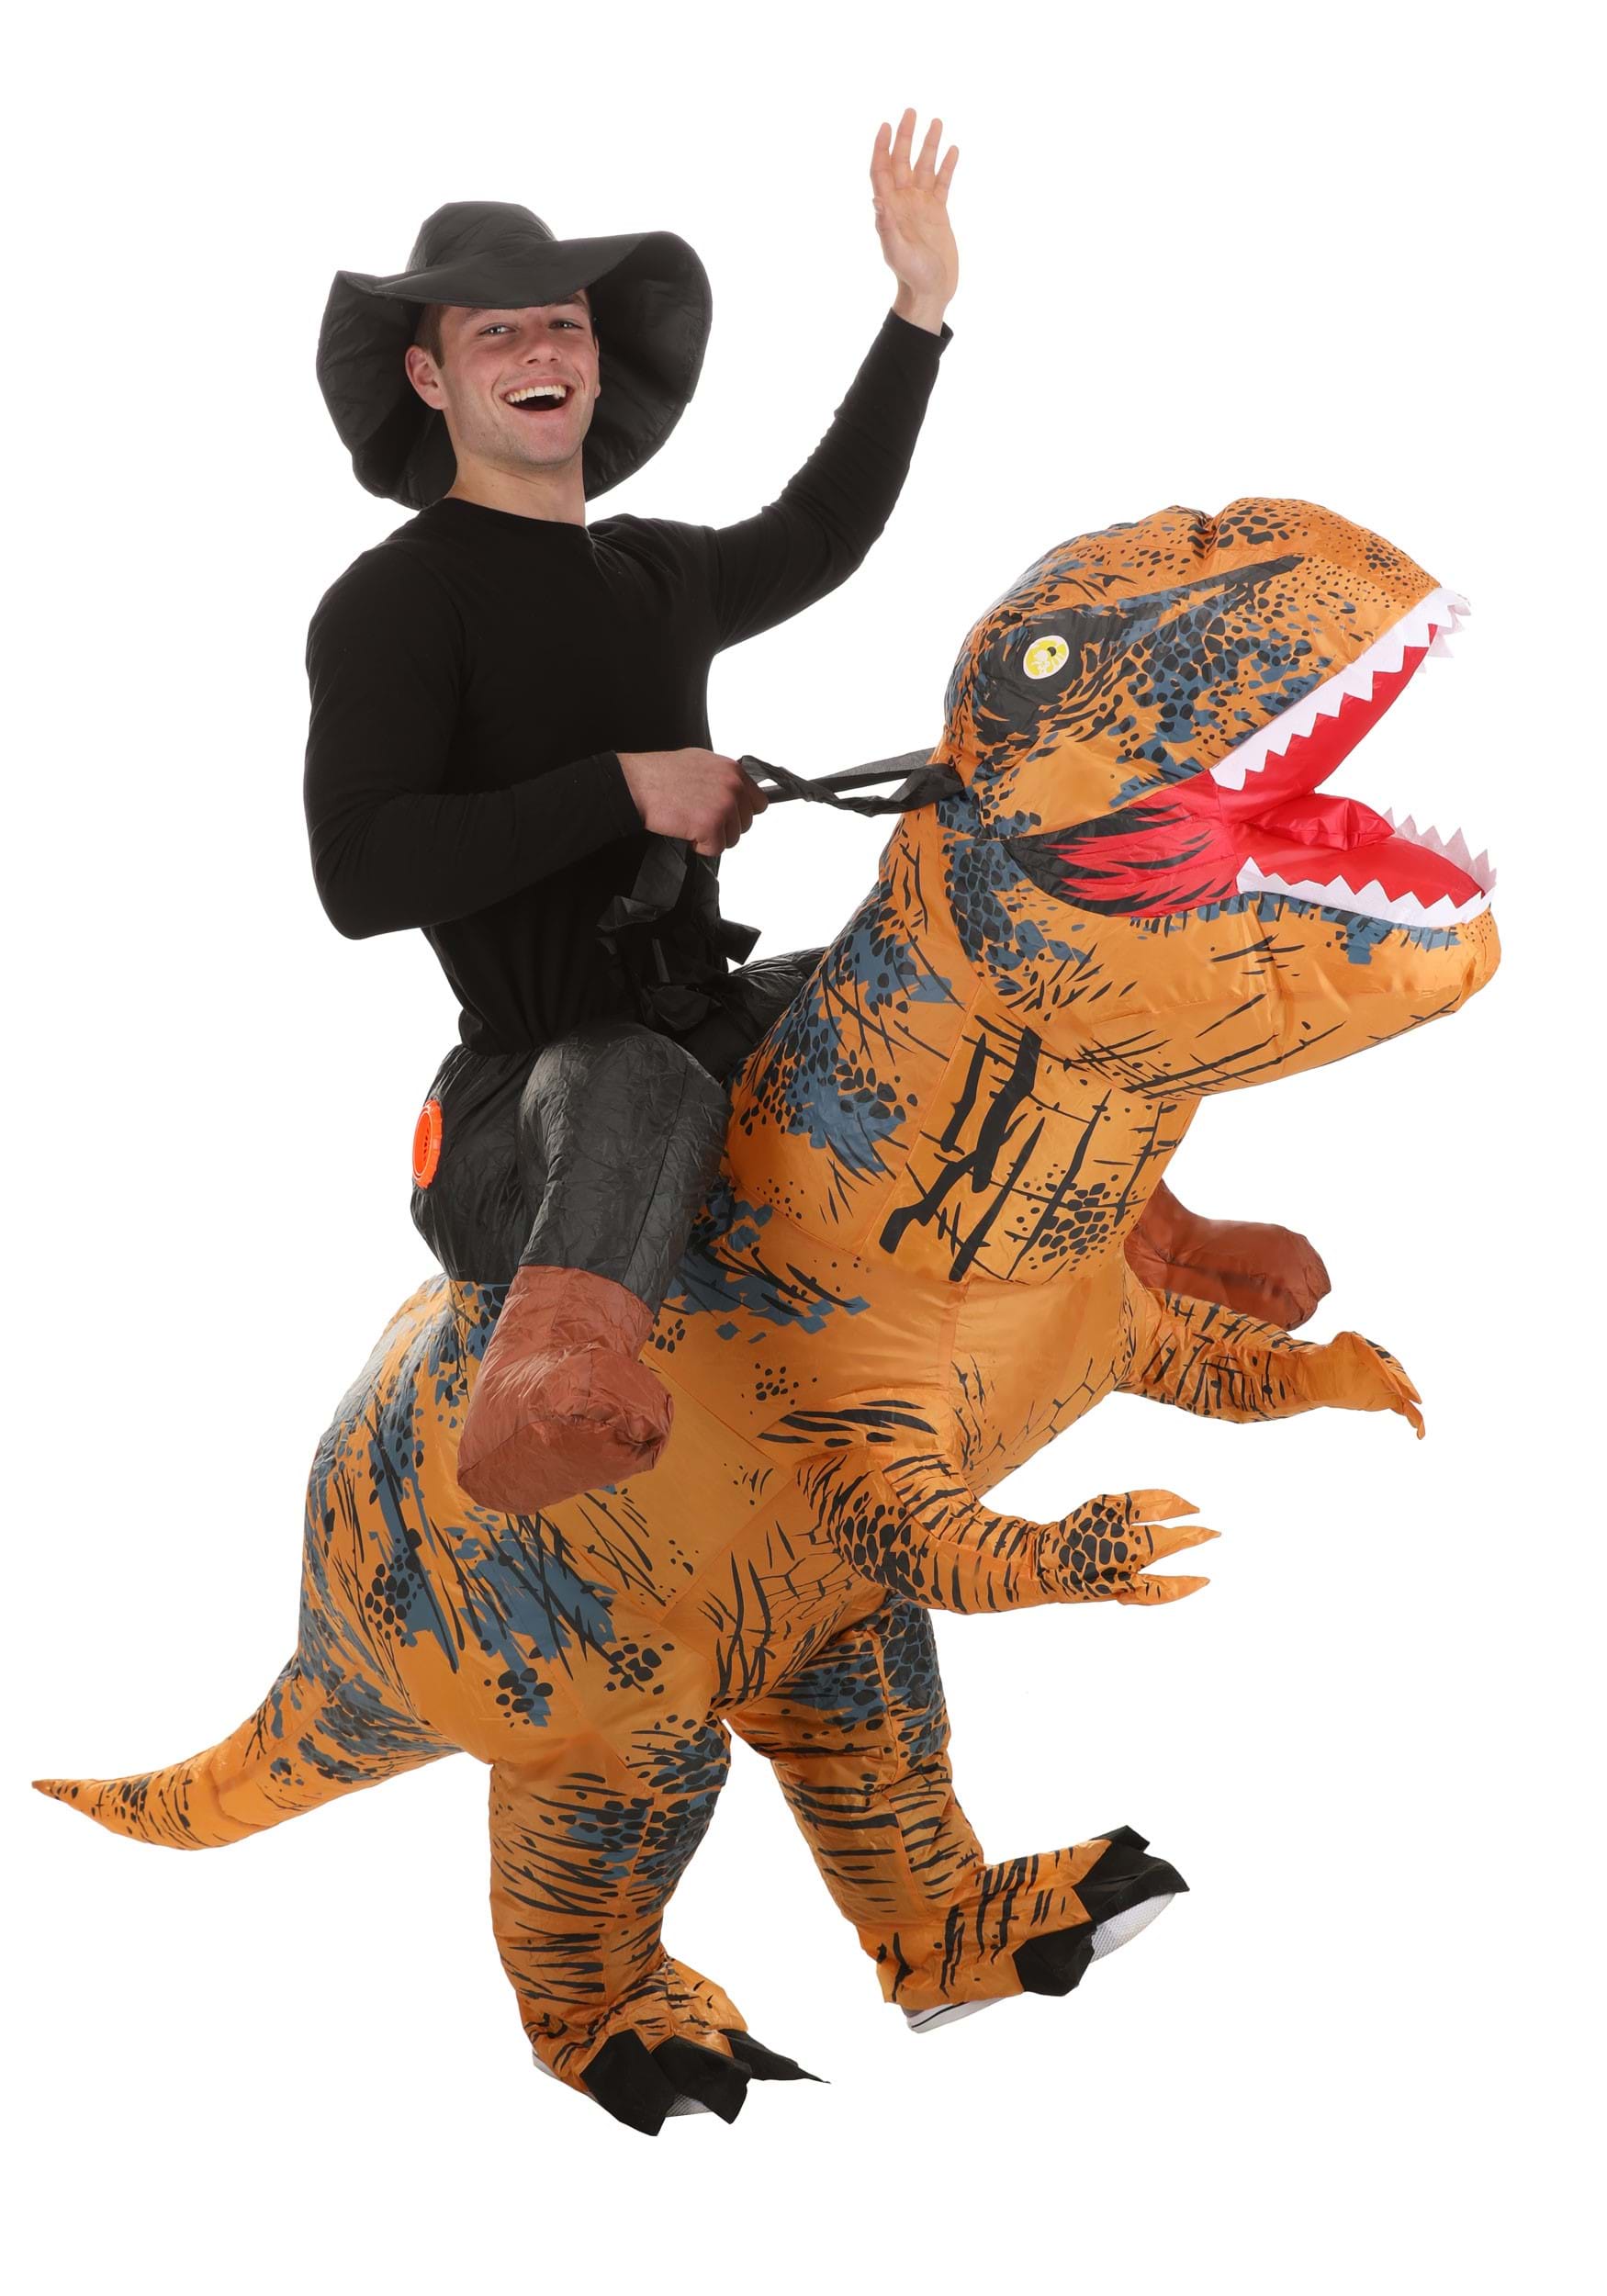 https://images.halloweencostumes.com/products/89952/1-1/adult-ride-on-t-rex-costume.jpg